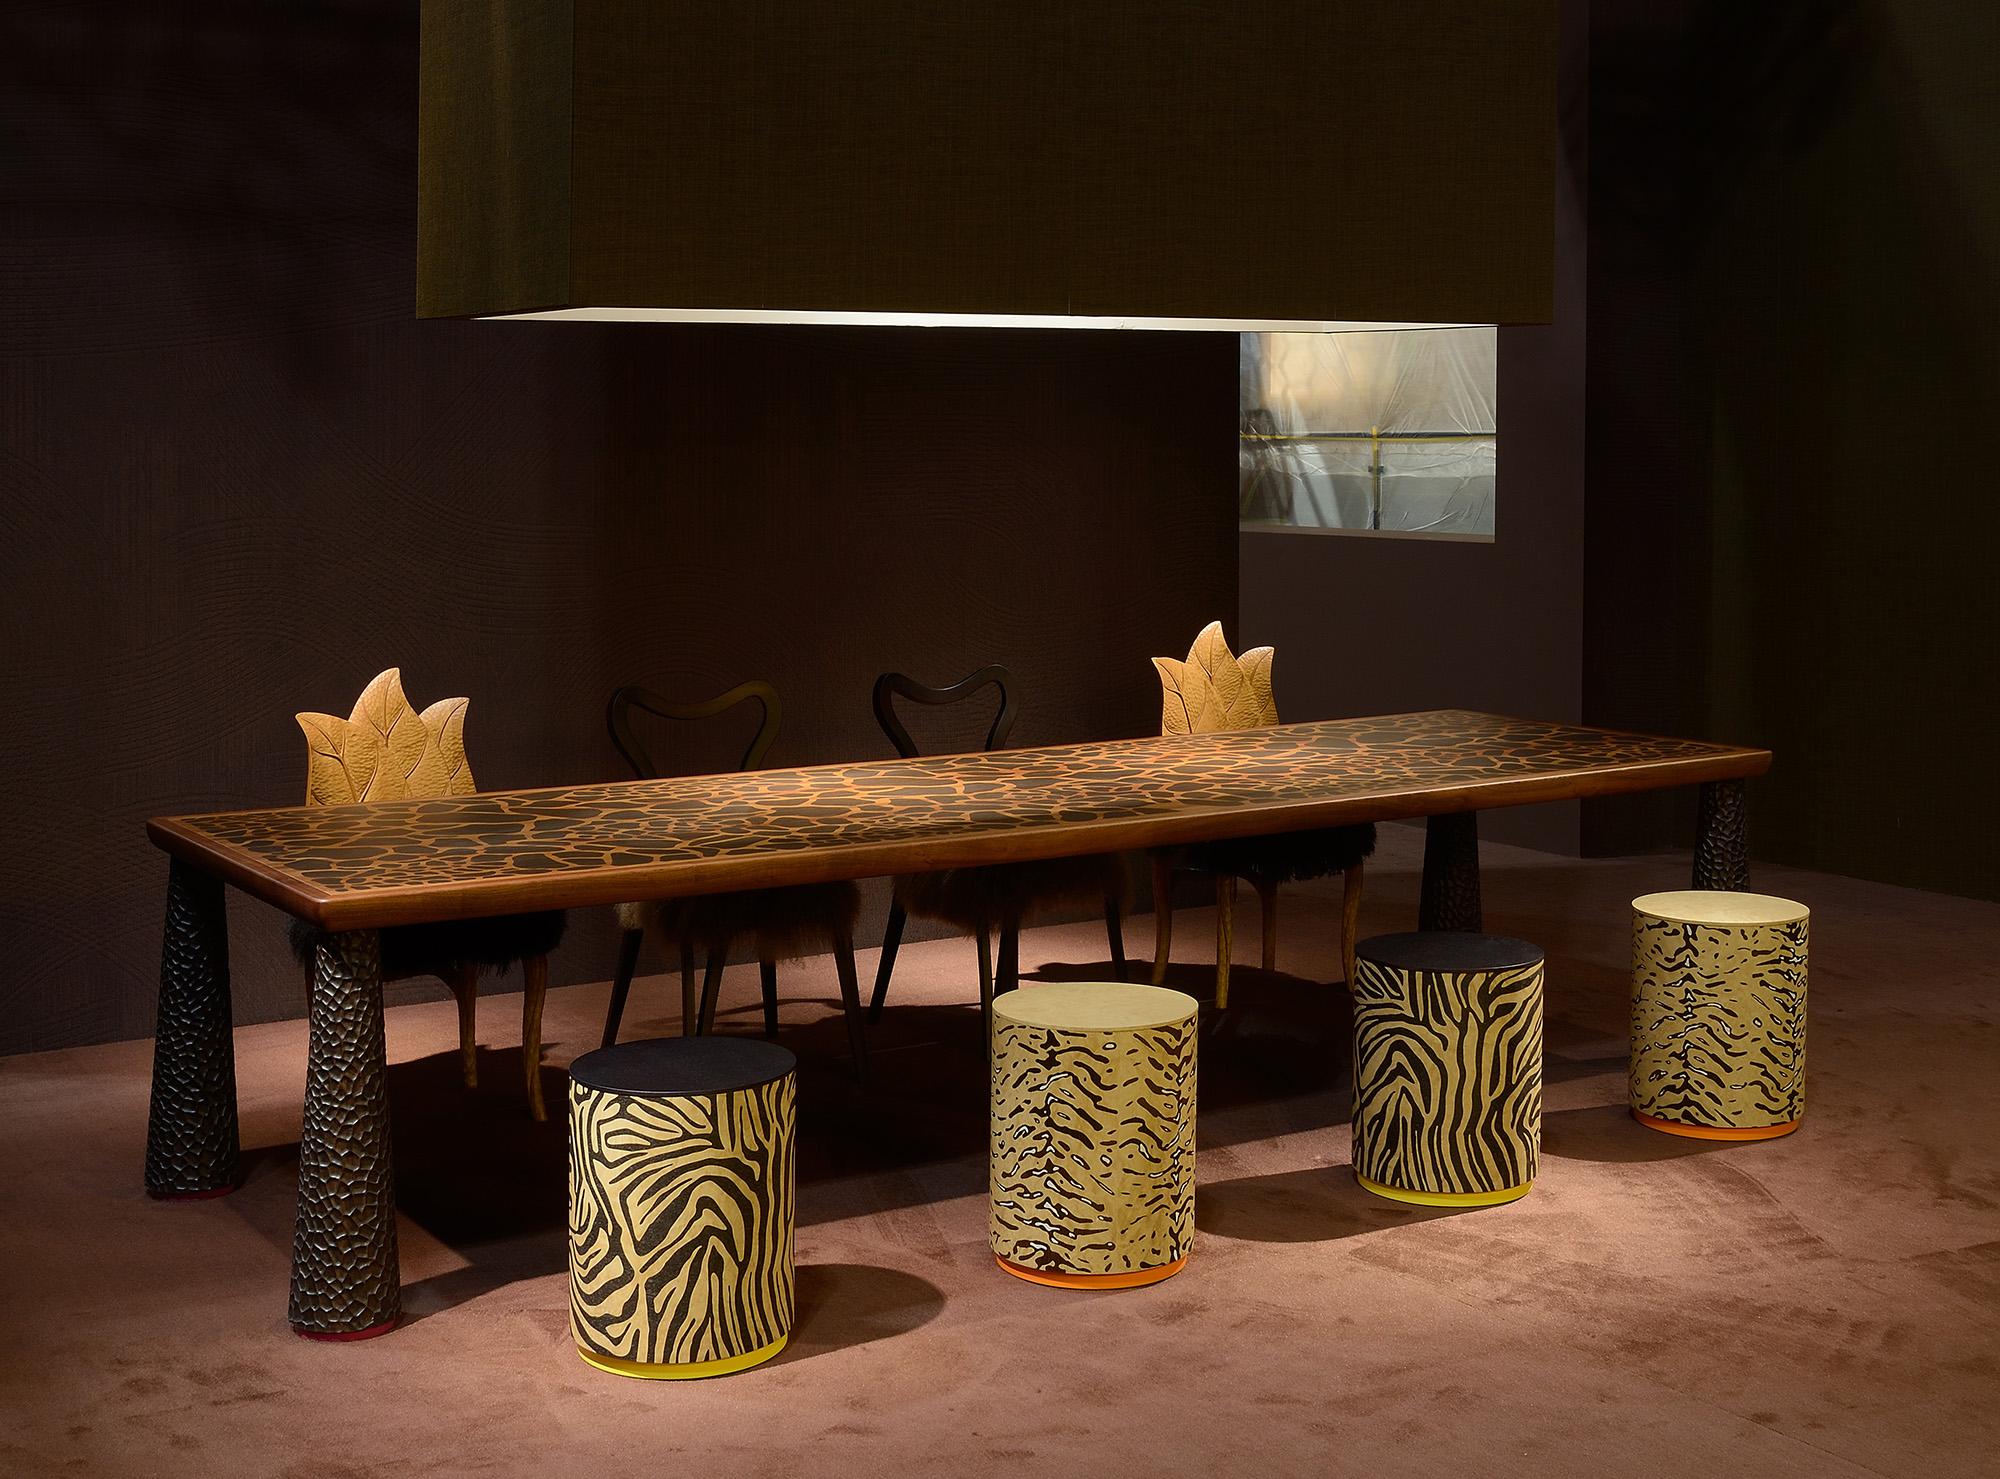 The Masai Dining Table is adorned with a mesmerizing giraffe inlay on the top and a solid mahogany frame, bringing a touch of the wild into your dining space. The giraffe finish adds a unique and luxurious character to the tabletop, making every